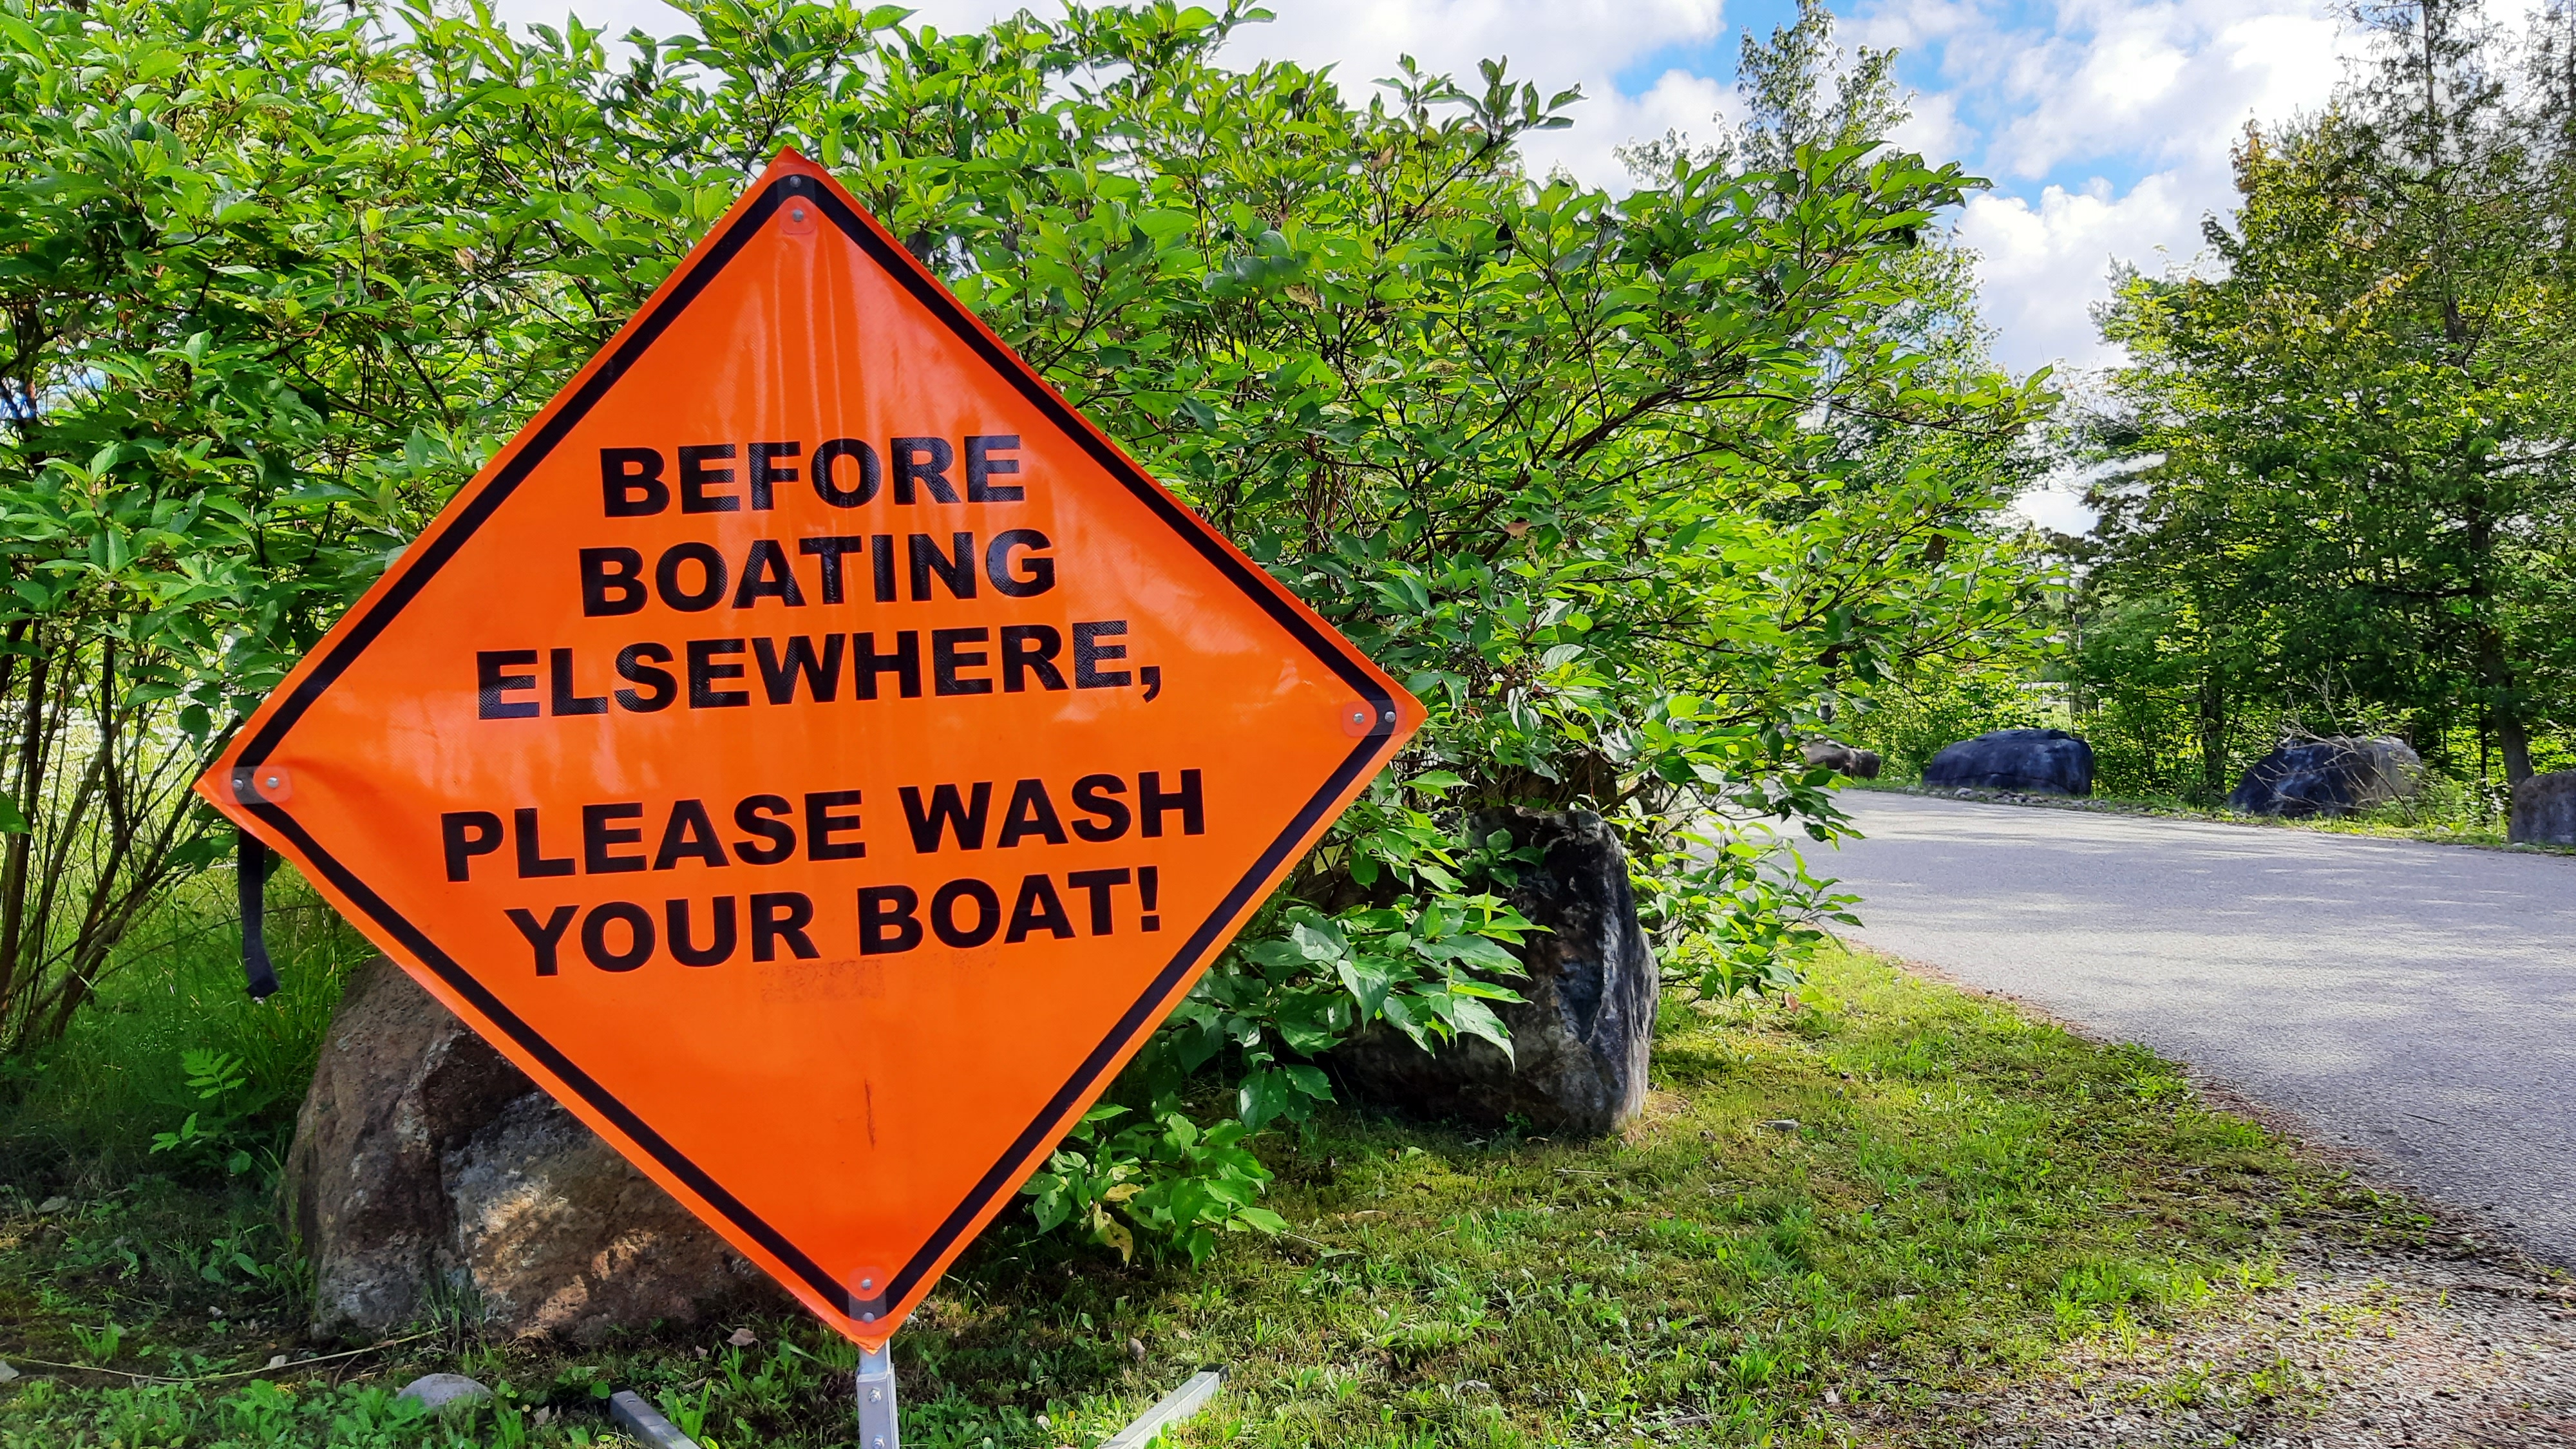 A sign reminds boaters to clean their boats to prevent spreading invasive species